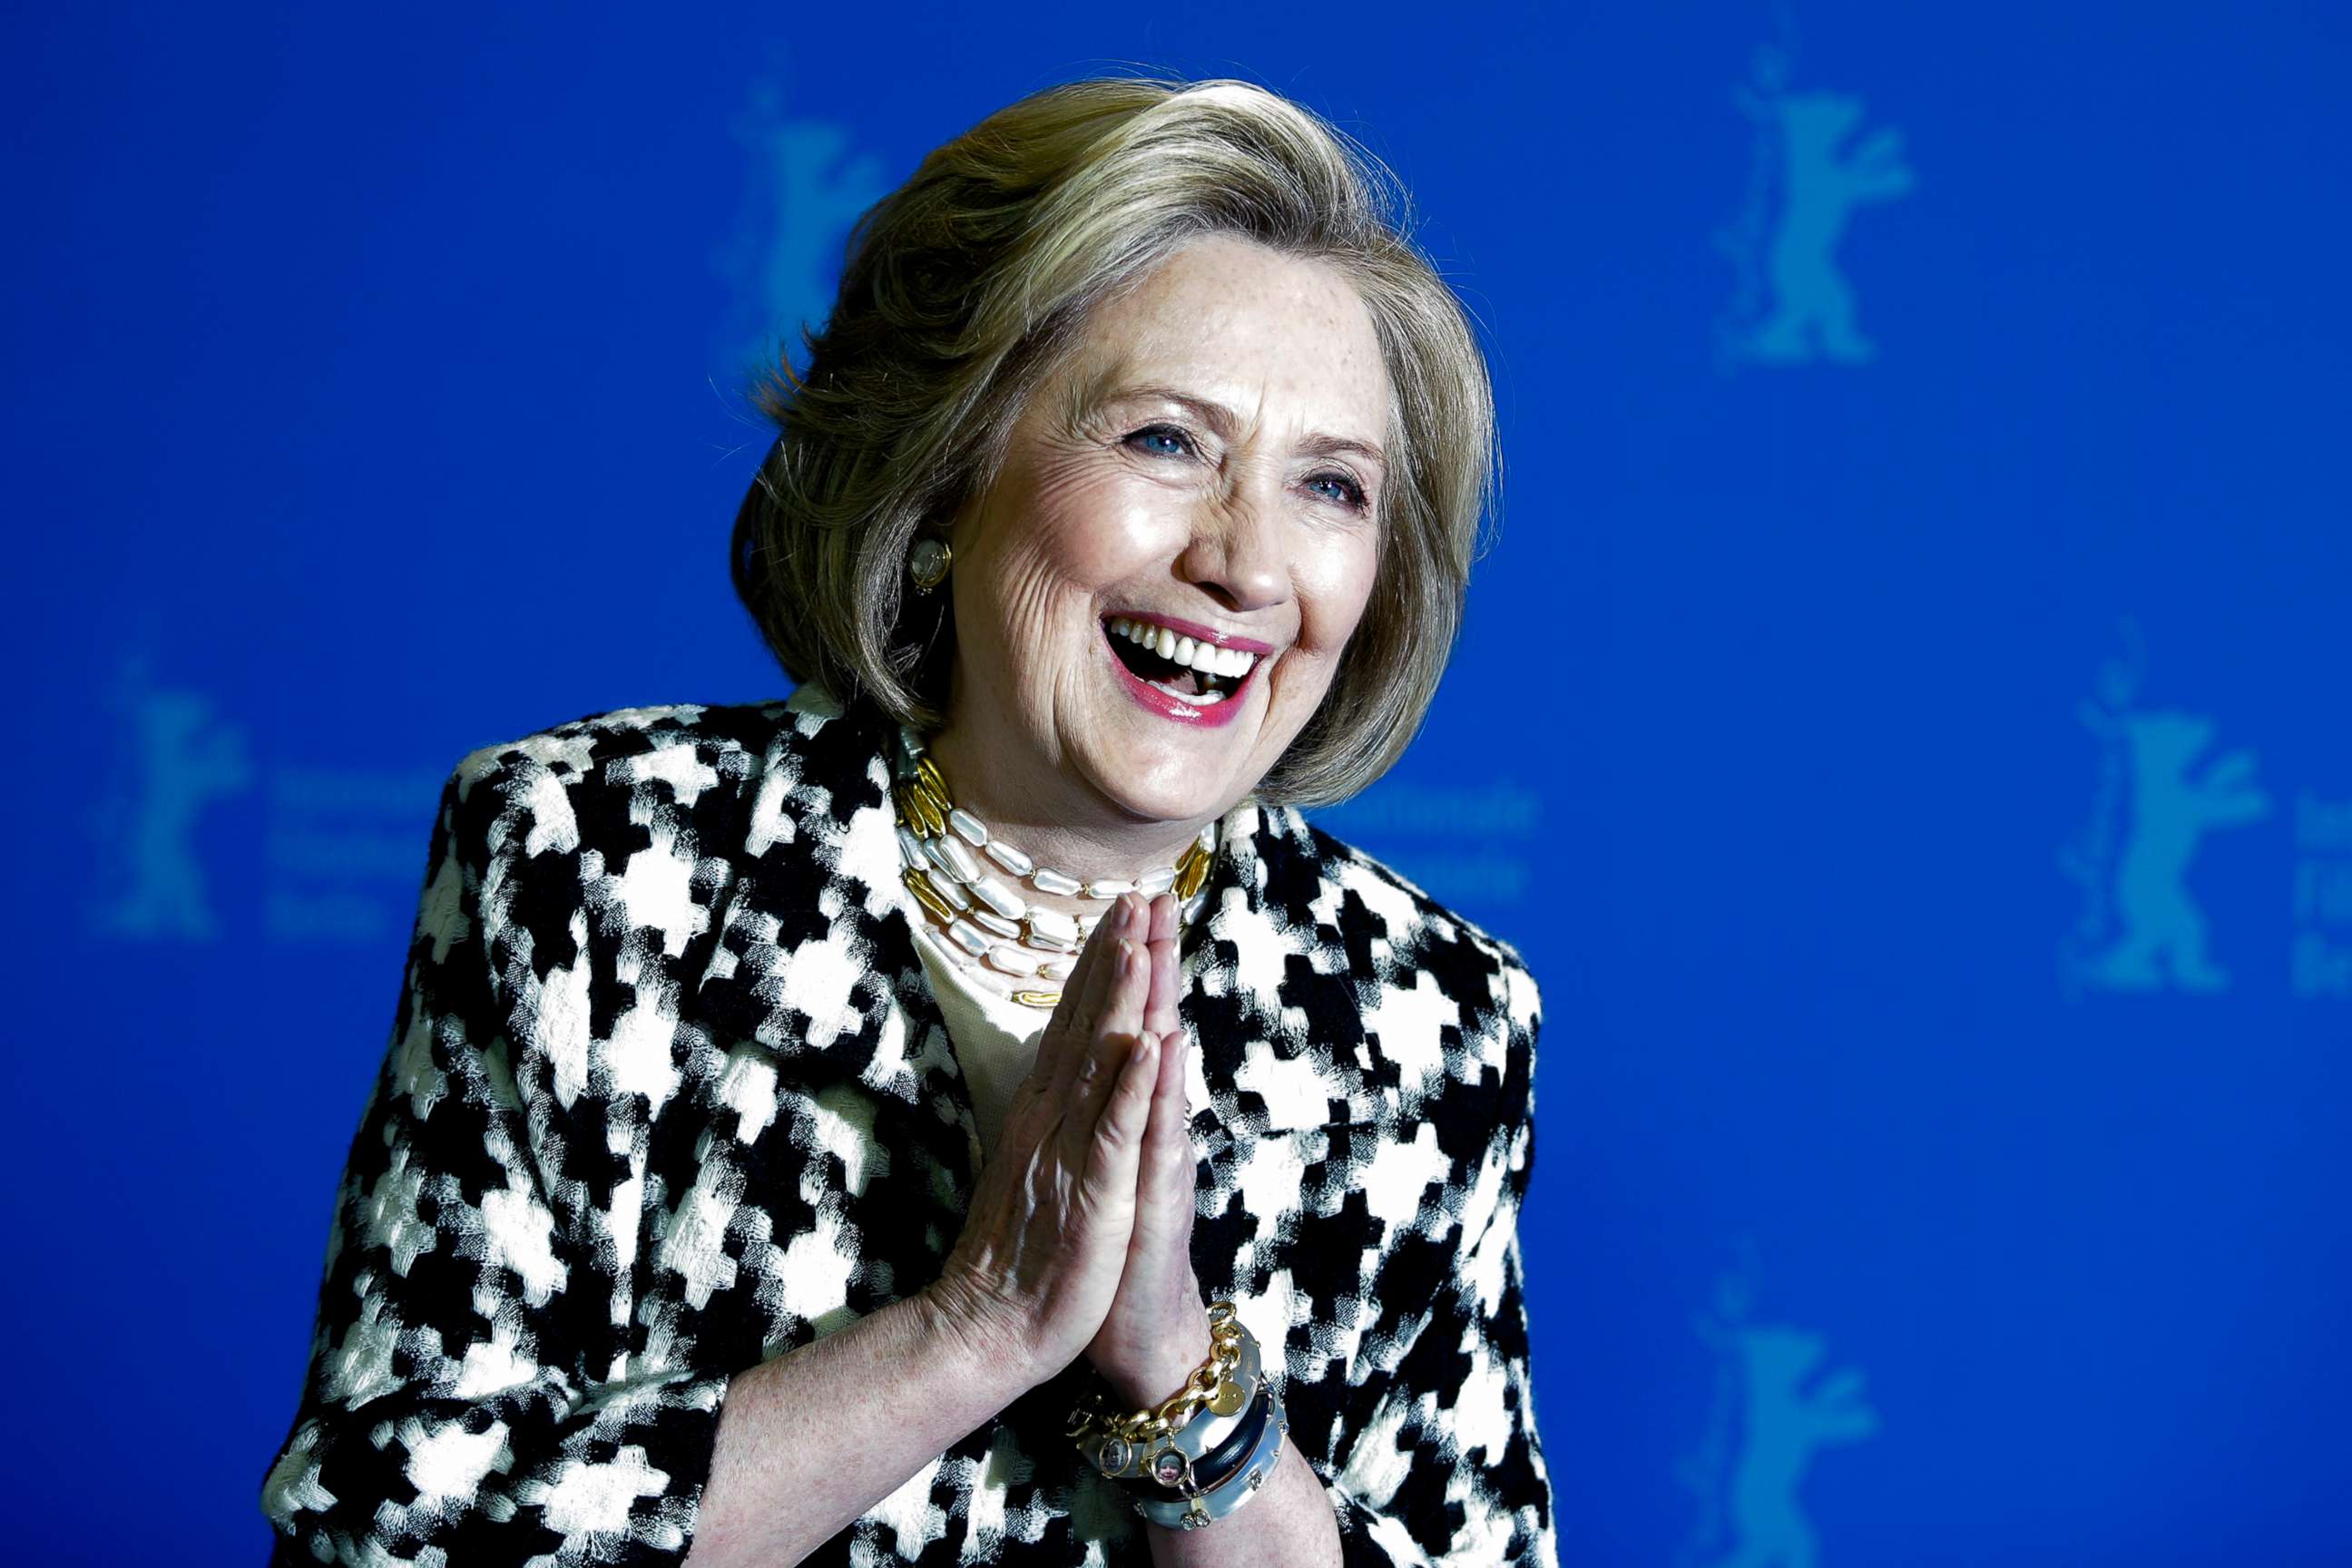 PHOTO: Former Secretary of State, Hillary Clinton, poses for the photographers during a photo-call for the film 'Hillary' ' during the 70th International Film Festival Berlin, Berlinale in Berlin, Feb. 25, 2020.